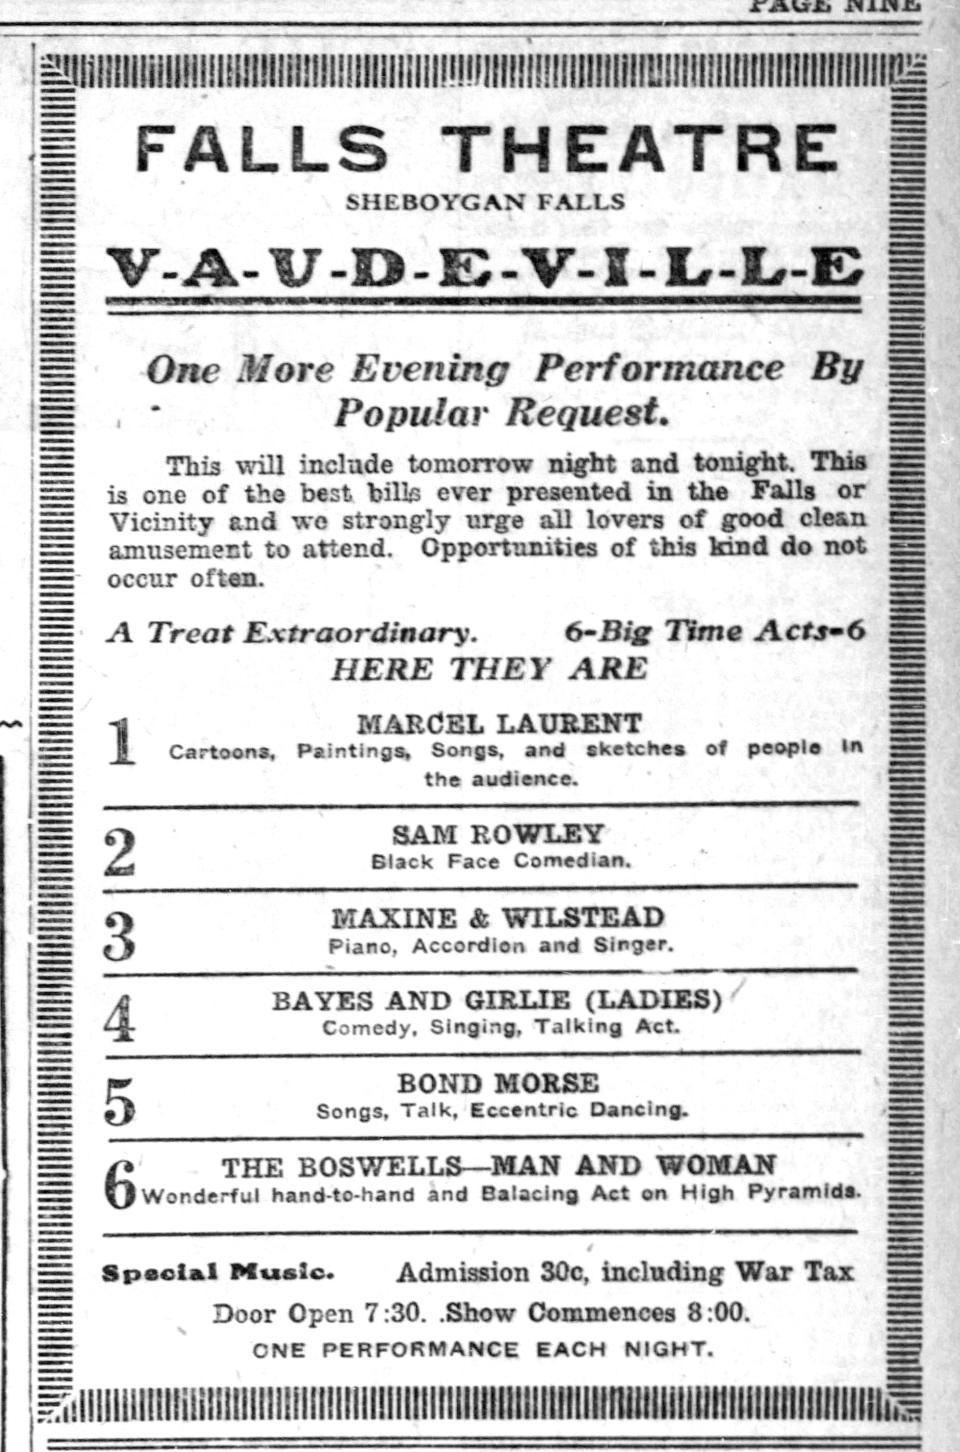 An advertisement in the Wednesday, December 11, 1918 edition of The Sheboygan Press featured a list of entertainment of at the Sheboygan Falls Theater.